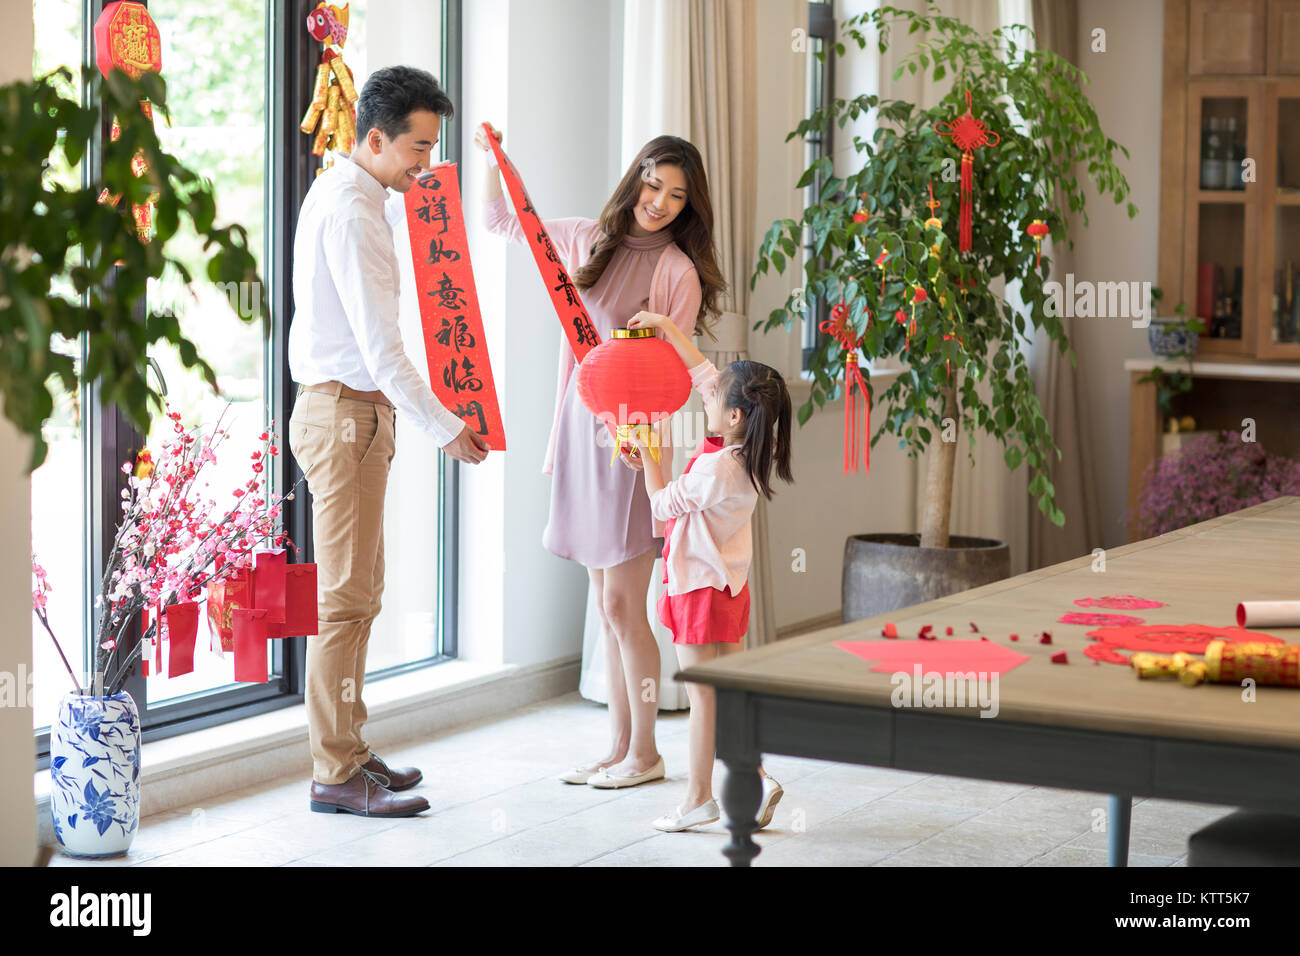 Happy family decorating their house for Chinese New Year Stock ...